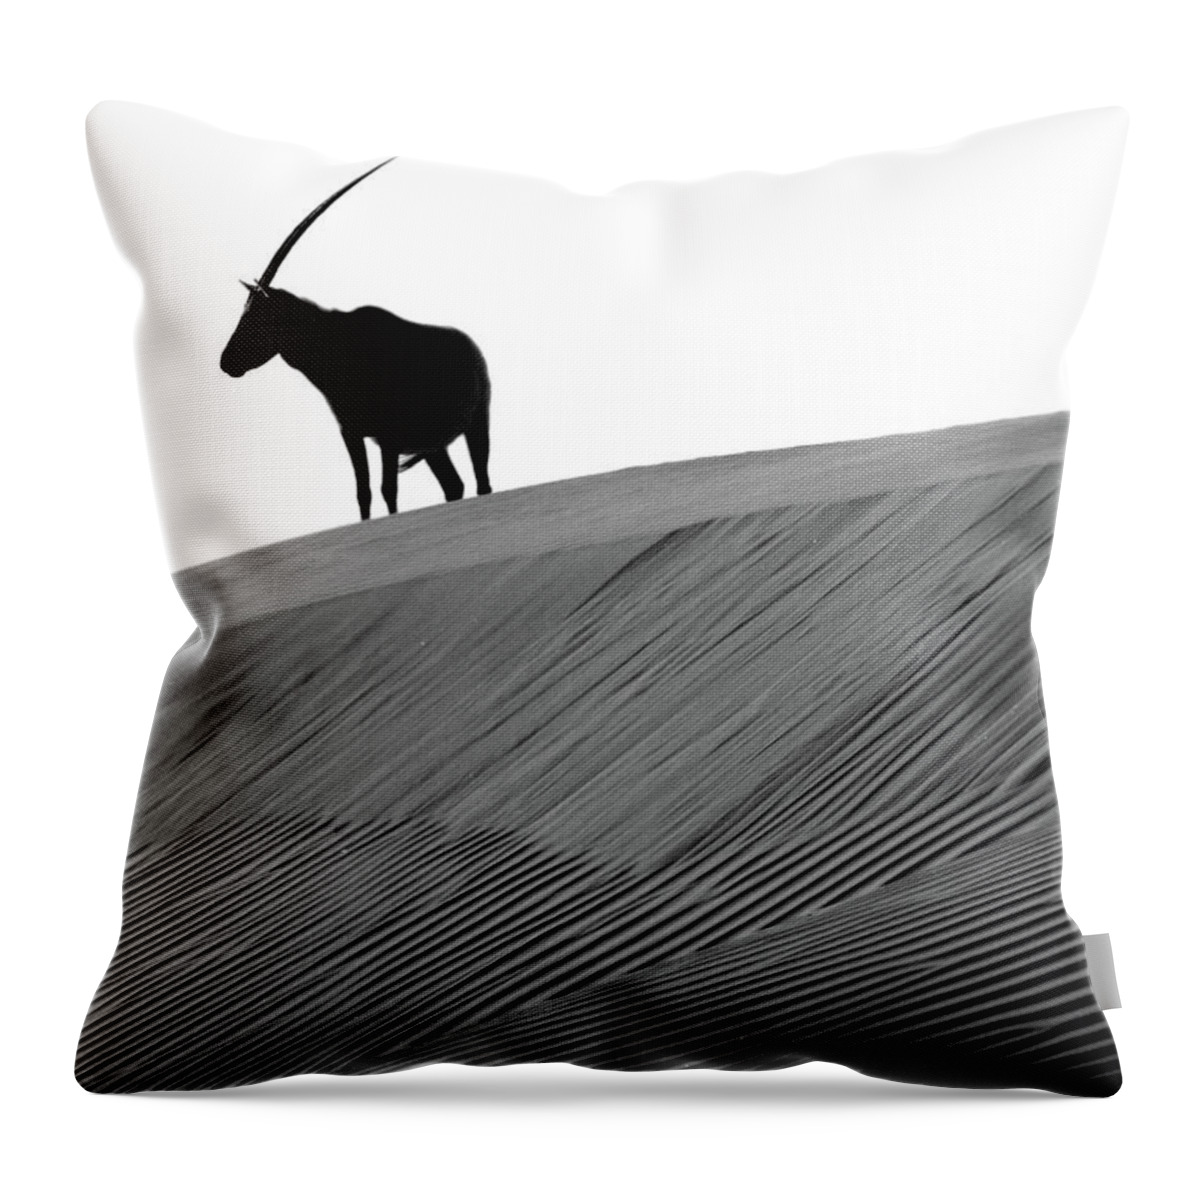 Horned Throw Pillow featuring the photograph Arabian Oryx And The Myth Of The Unicorn by Joe & Clair Carnegie / Libyan Soup